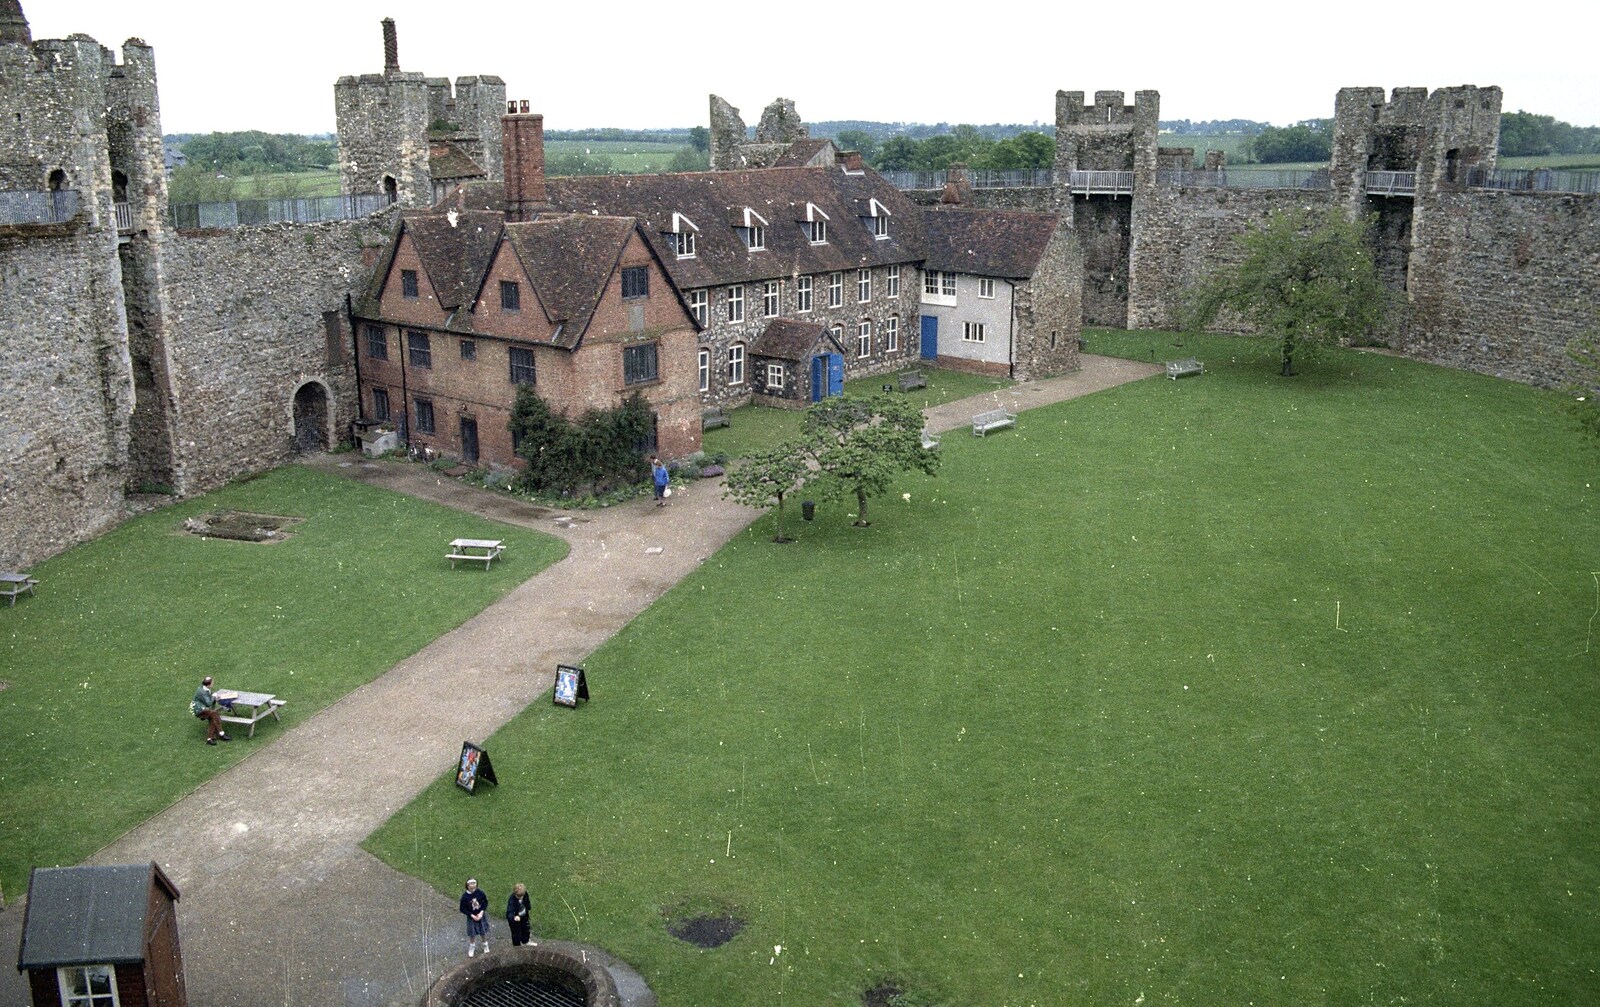 The castle courtyard from the castle walls from House Renovation Randomness and a Spot of Lightning, Brome, Suffolk - 19th June 1994